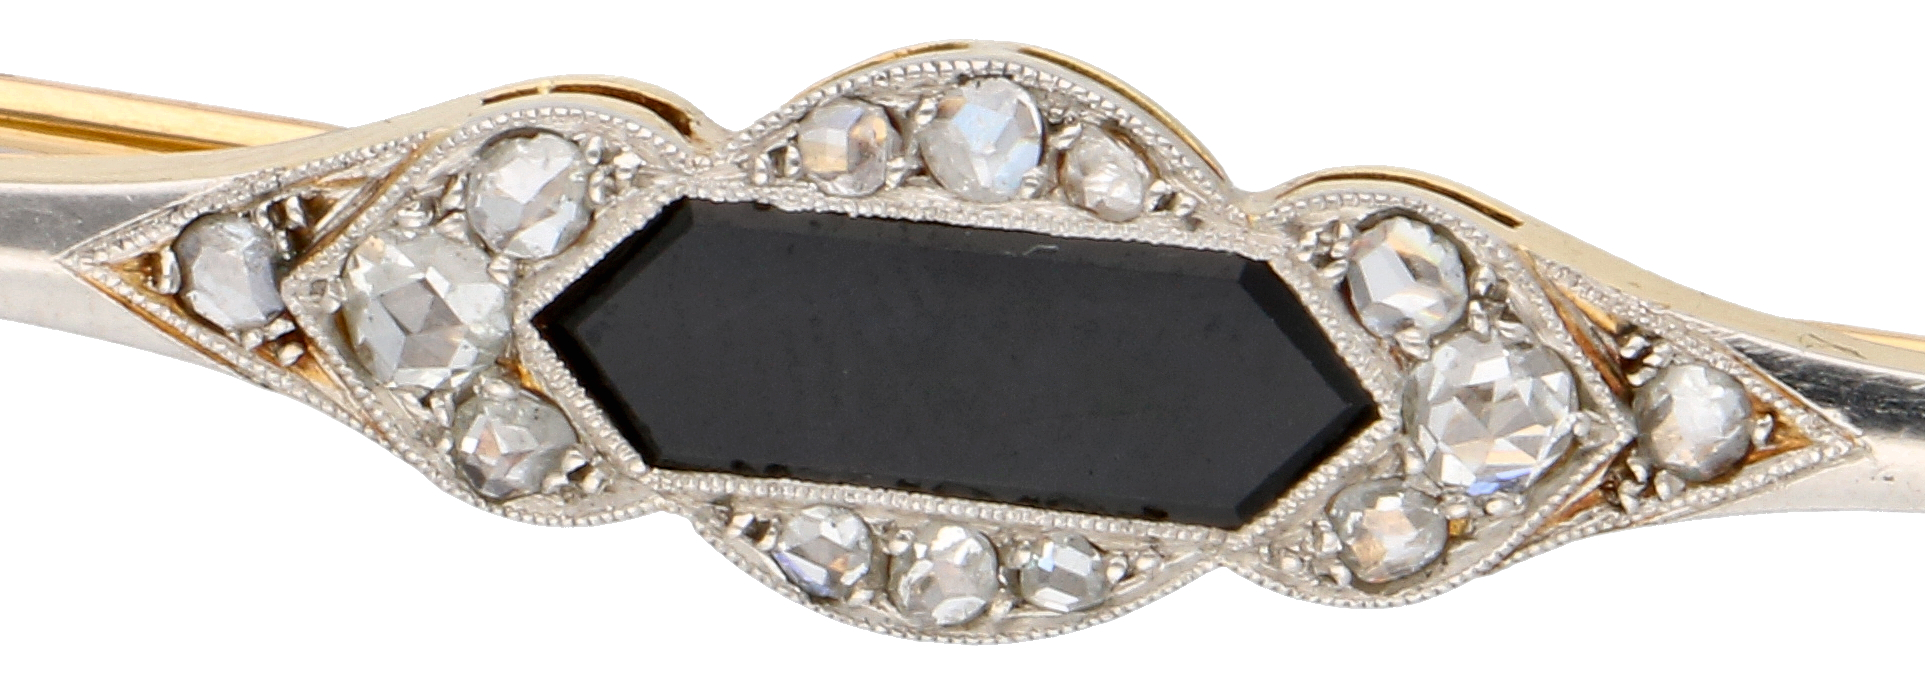 No Reserve - 14K Bicolor gold vintage brooch set with rose cut diamonds and onyx. - Image 2 of 3